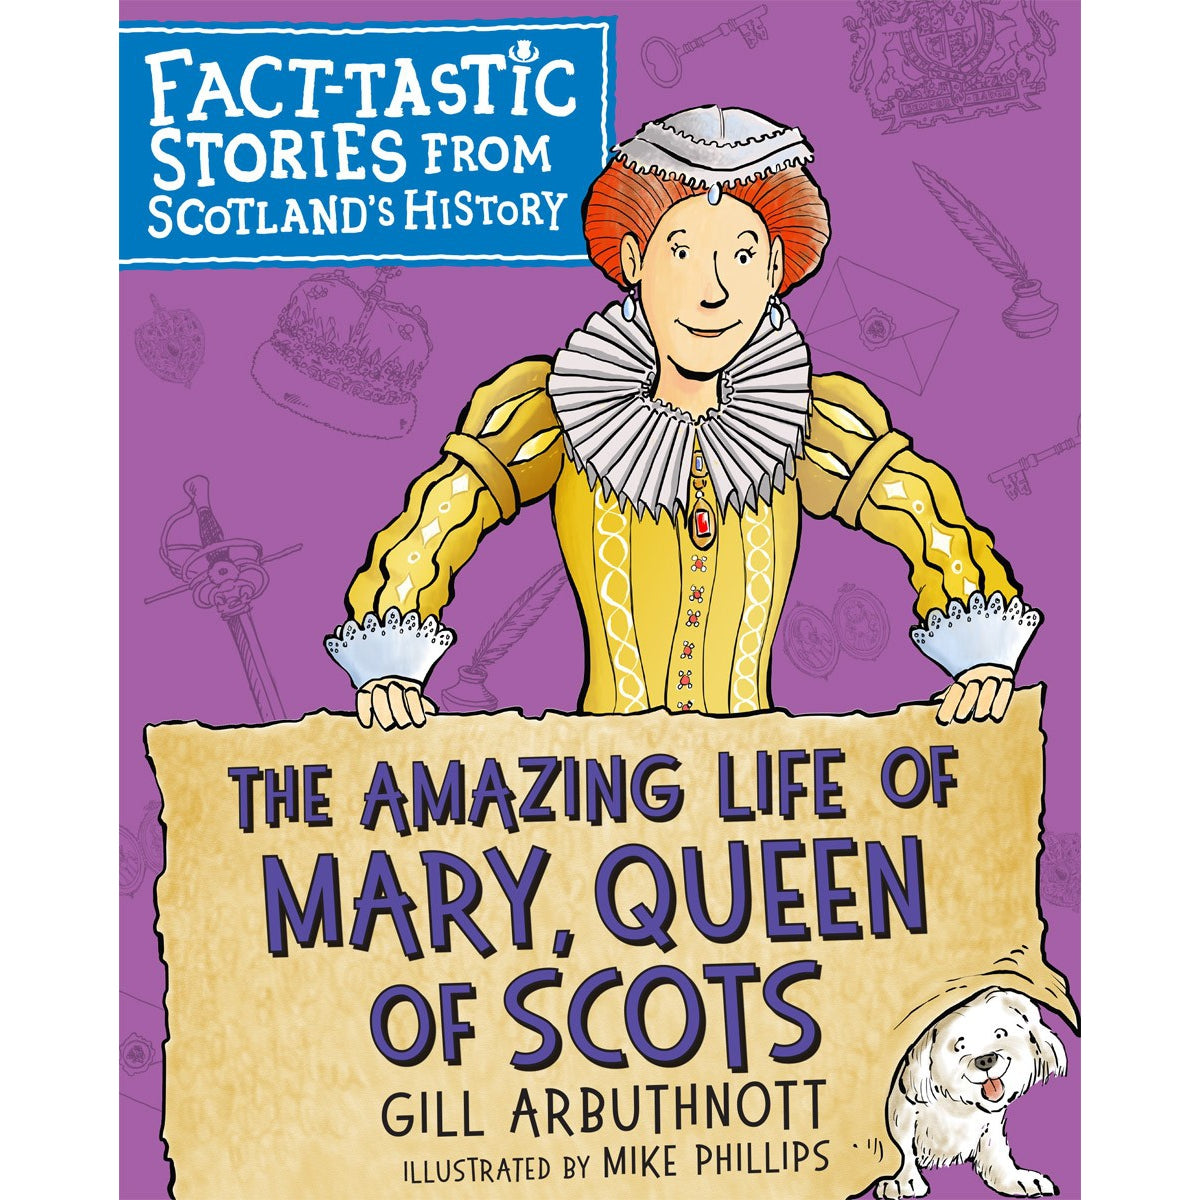 The Amazing Life of Mary Queen of Scots: Fact-tastic Stories from Scotland's History - Gill Arbuthnott & Mike Phillips